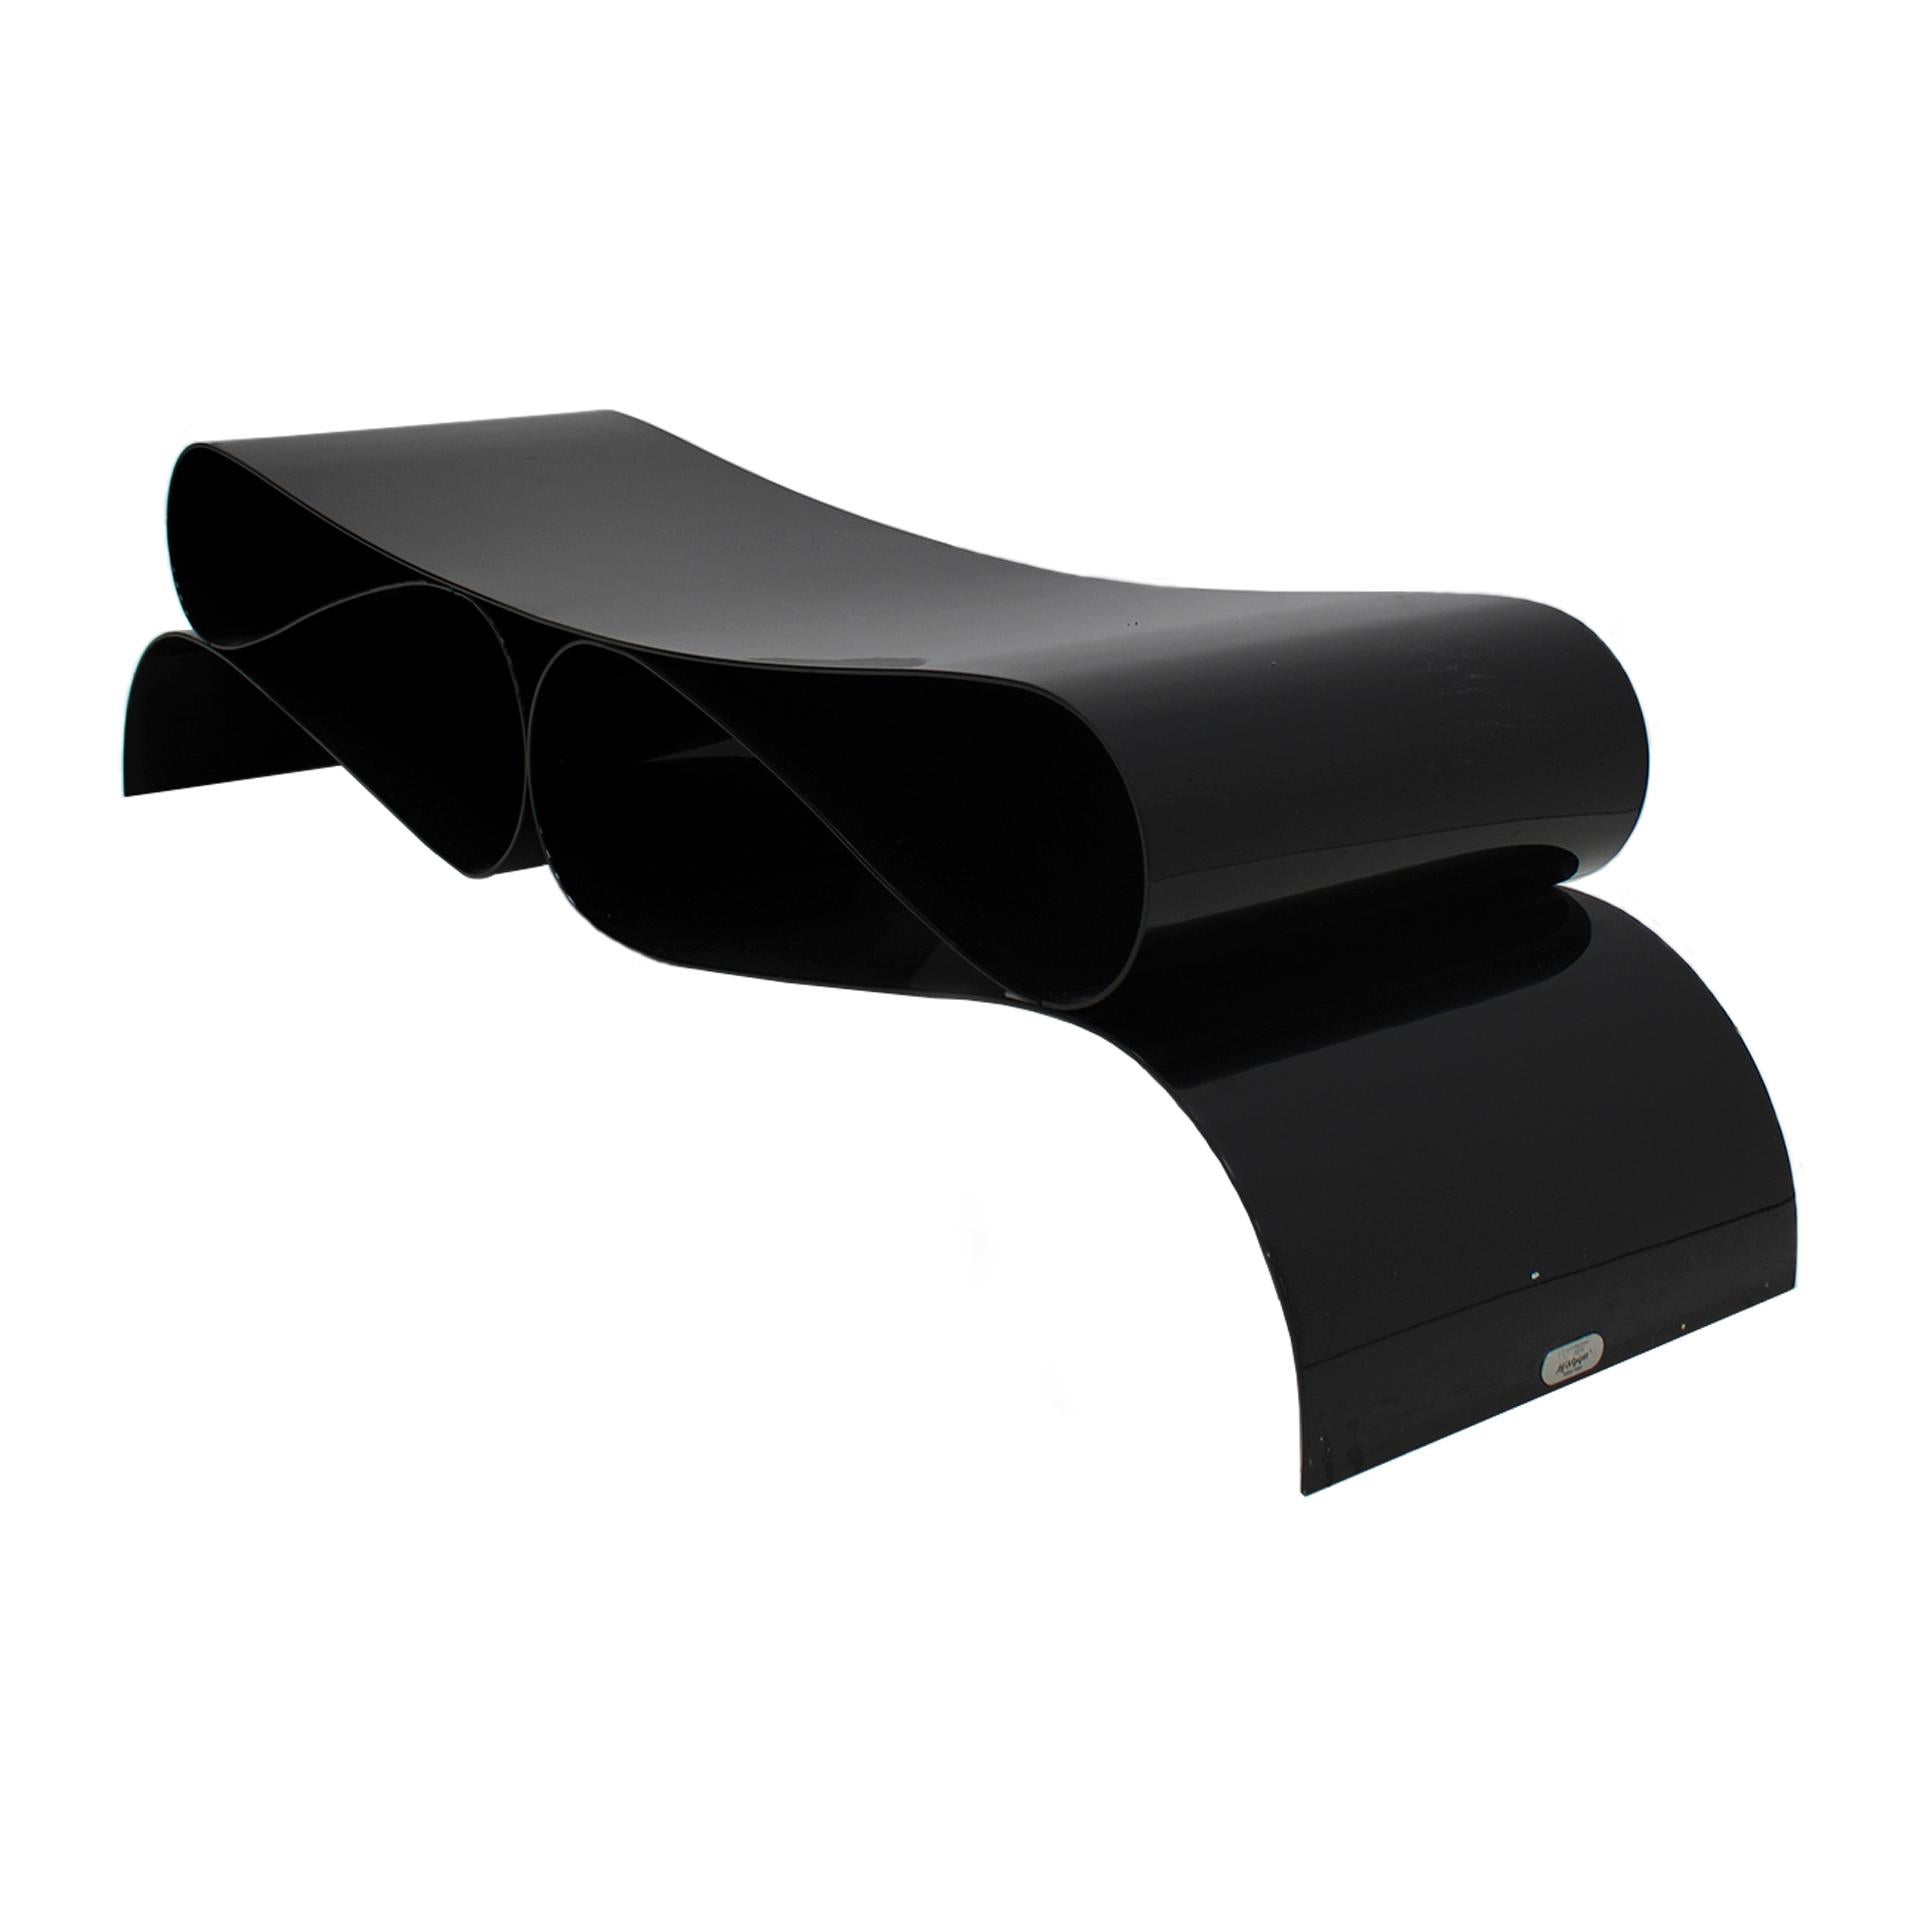 Modern ‘Nastro di Gala’ Bench Designed by Agenore Fabbri and Manufactured by Tecno